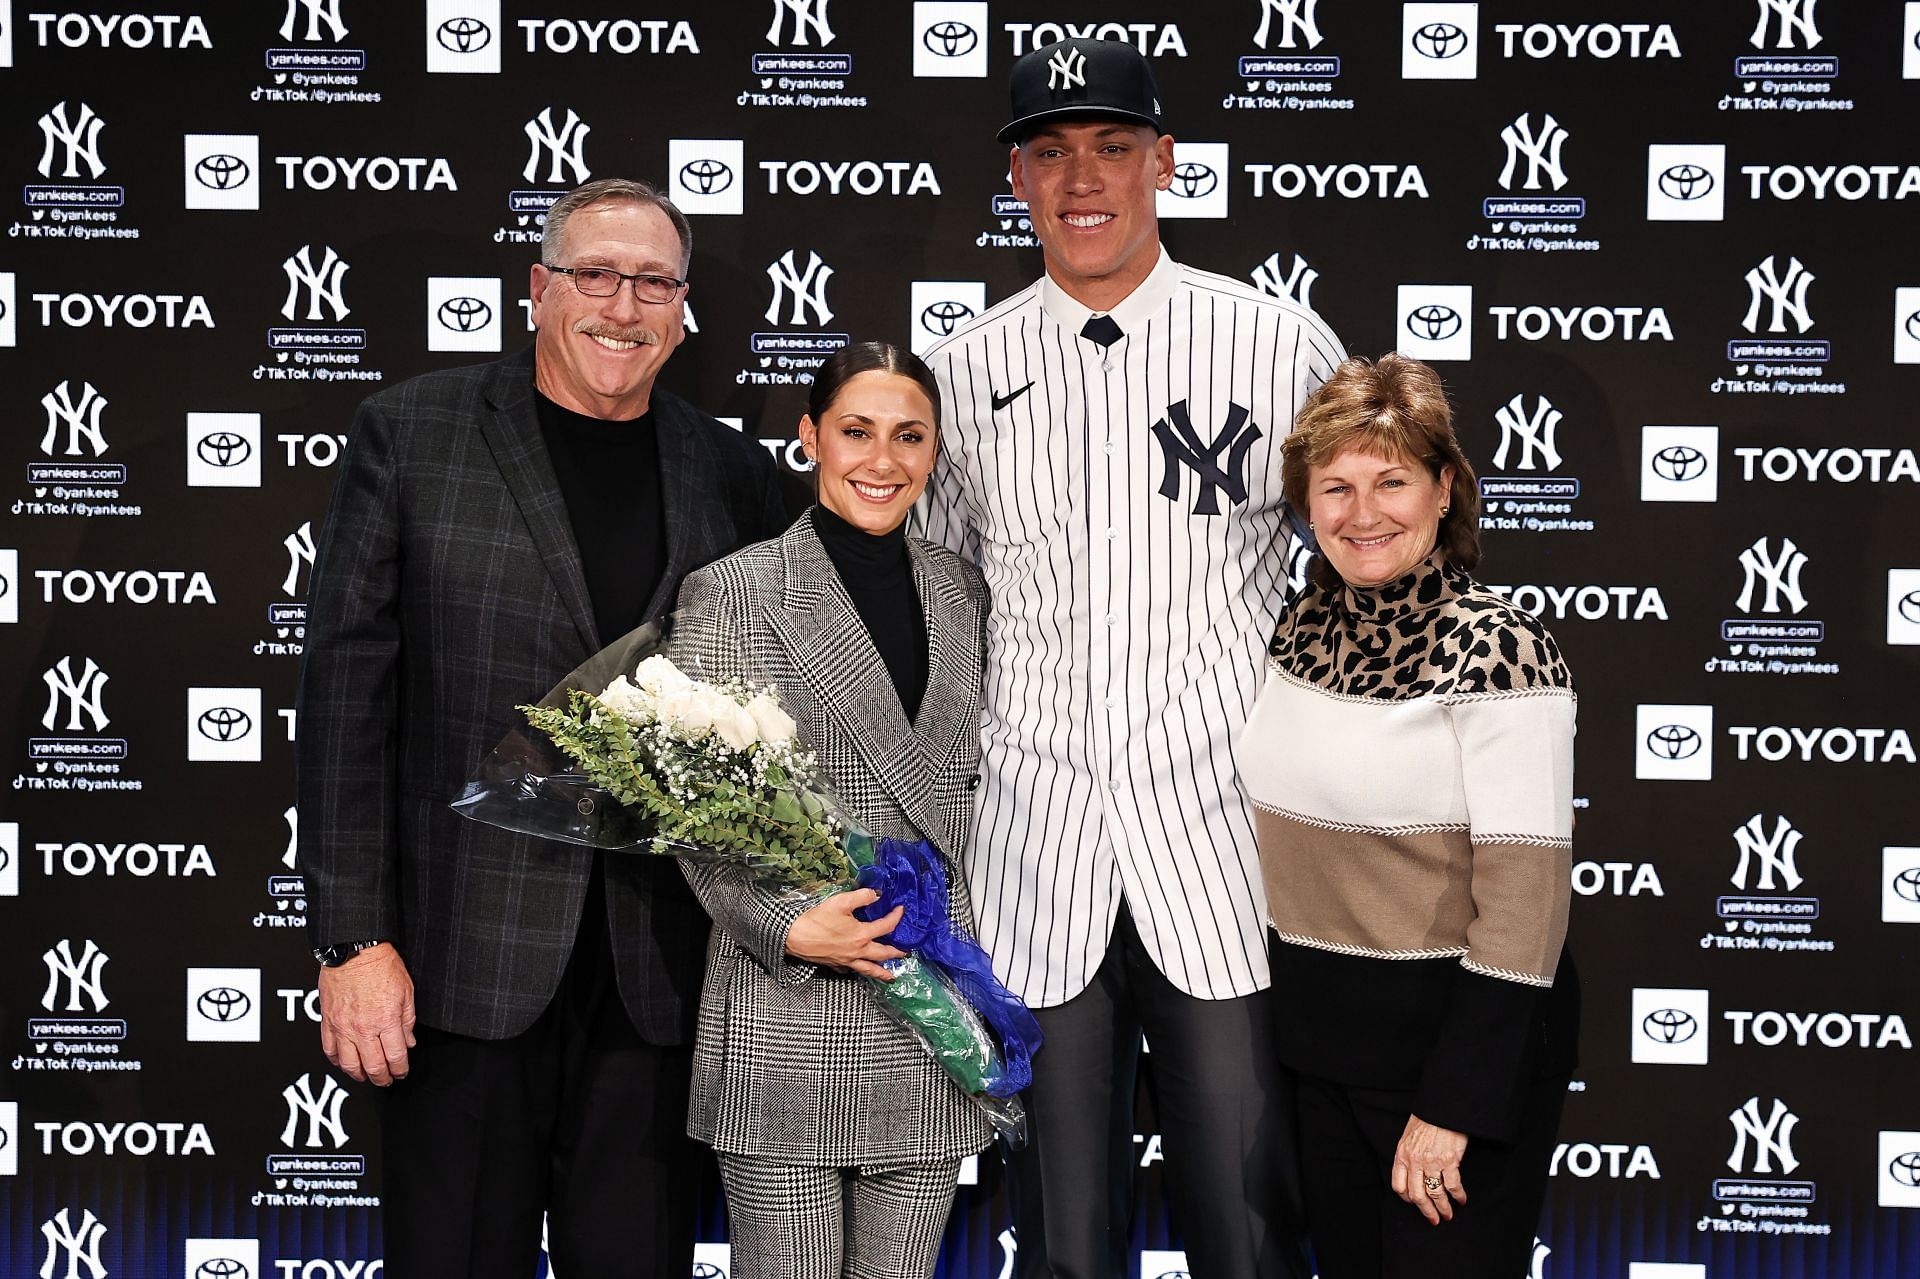 Aaron with his family at the NY Yankees Press Conference.